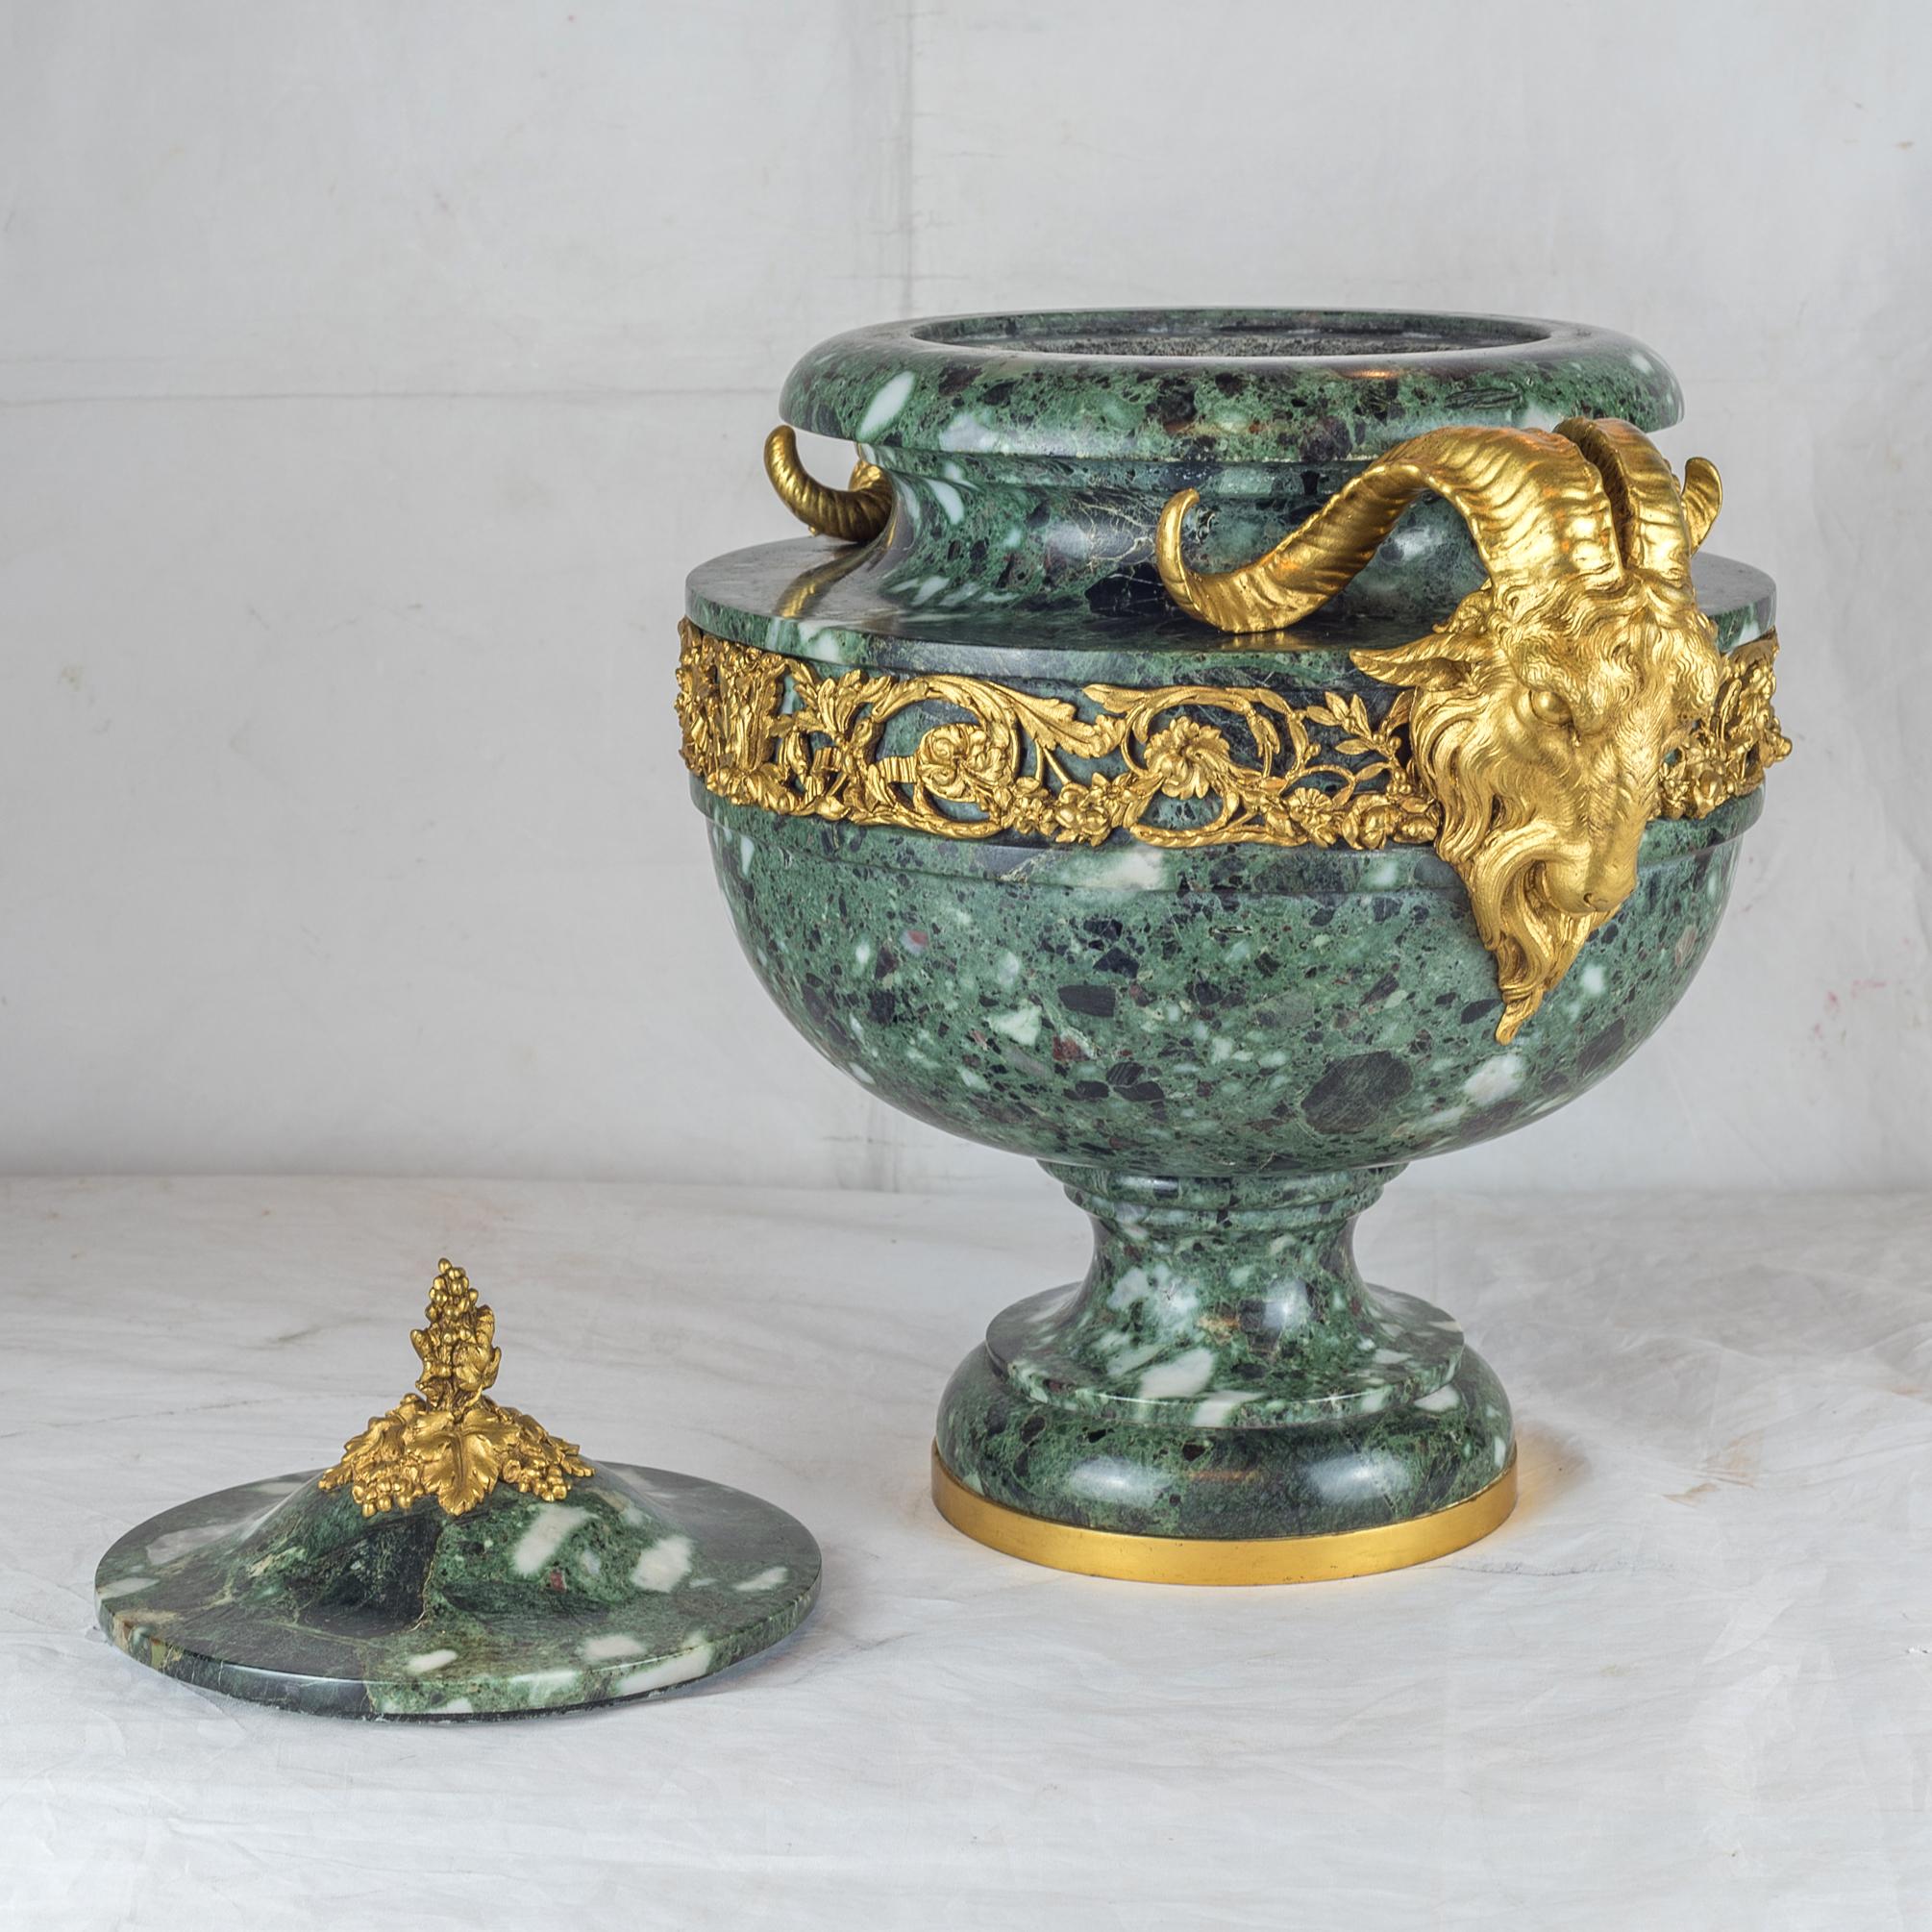 Gilt 19th Century Pair of Louis XVI Style Ormolu Verde Antico Mounted Marble Urns For Sale